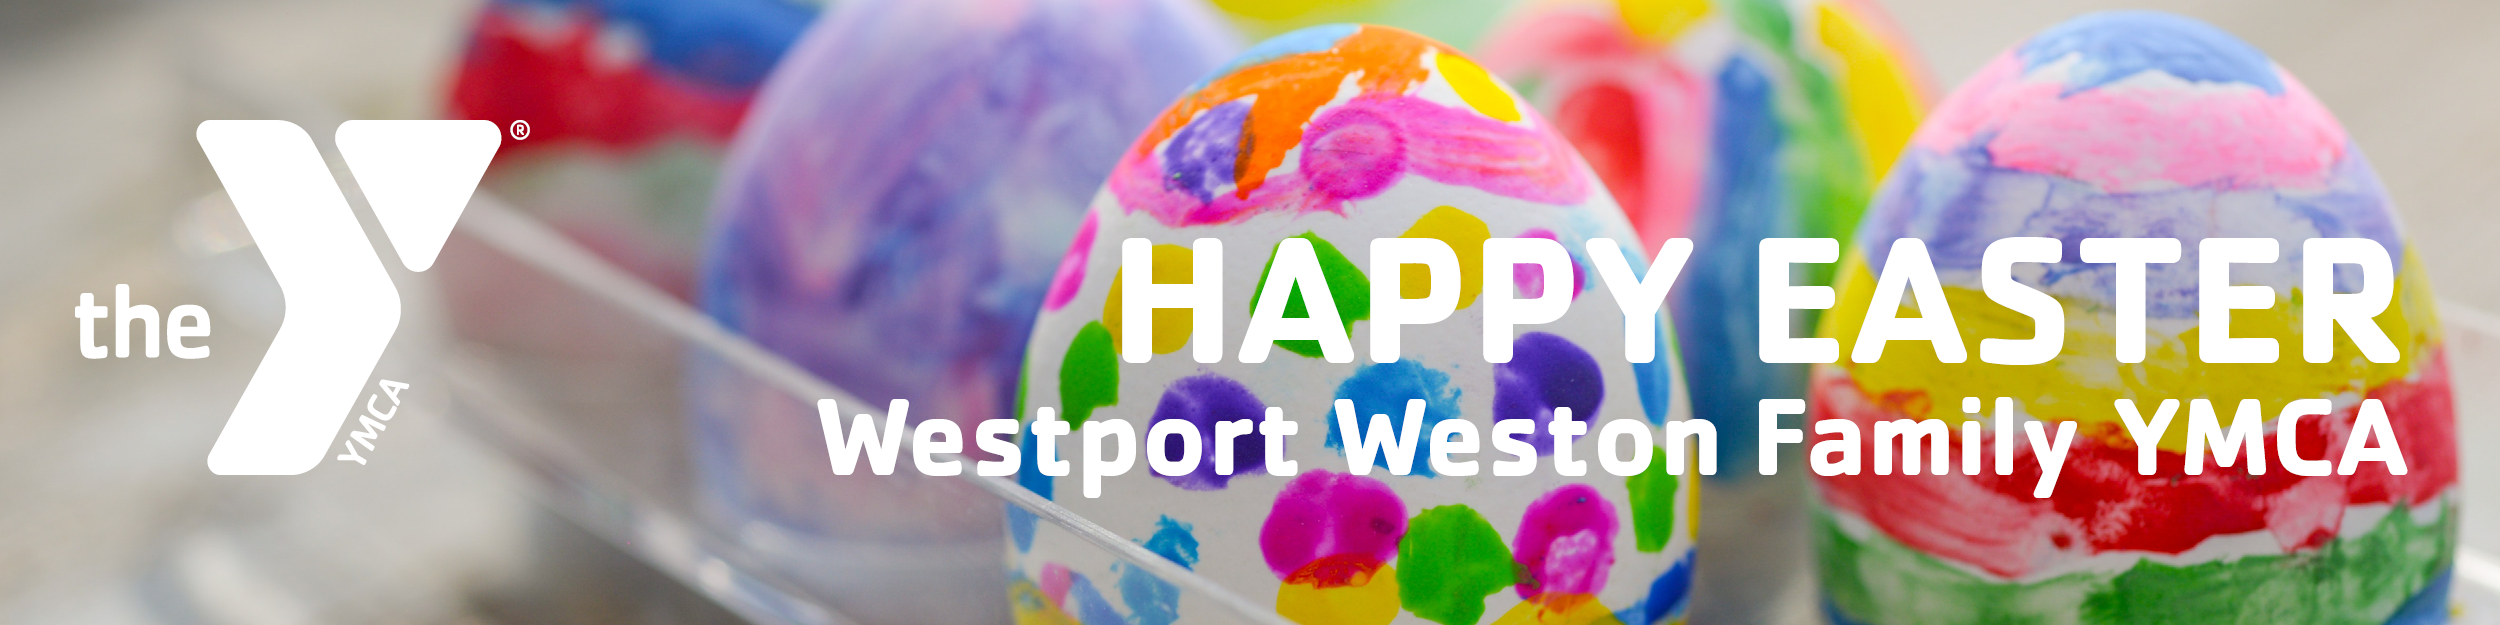 Happy Easter from the Westport Weston Family YMCA